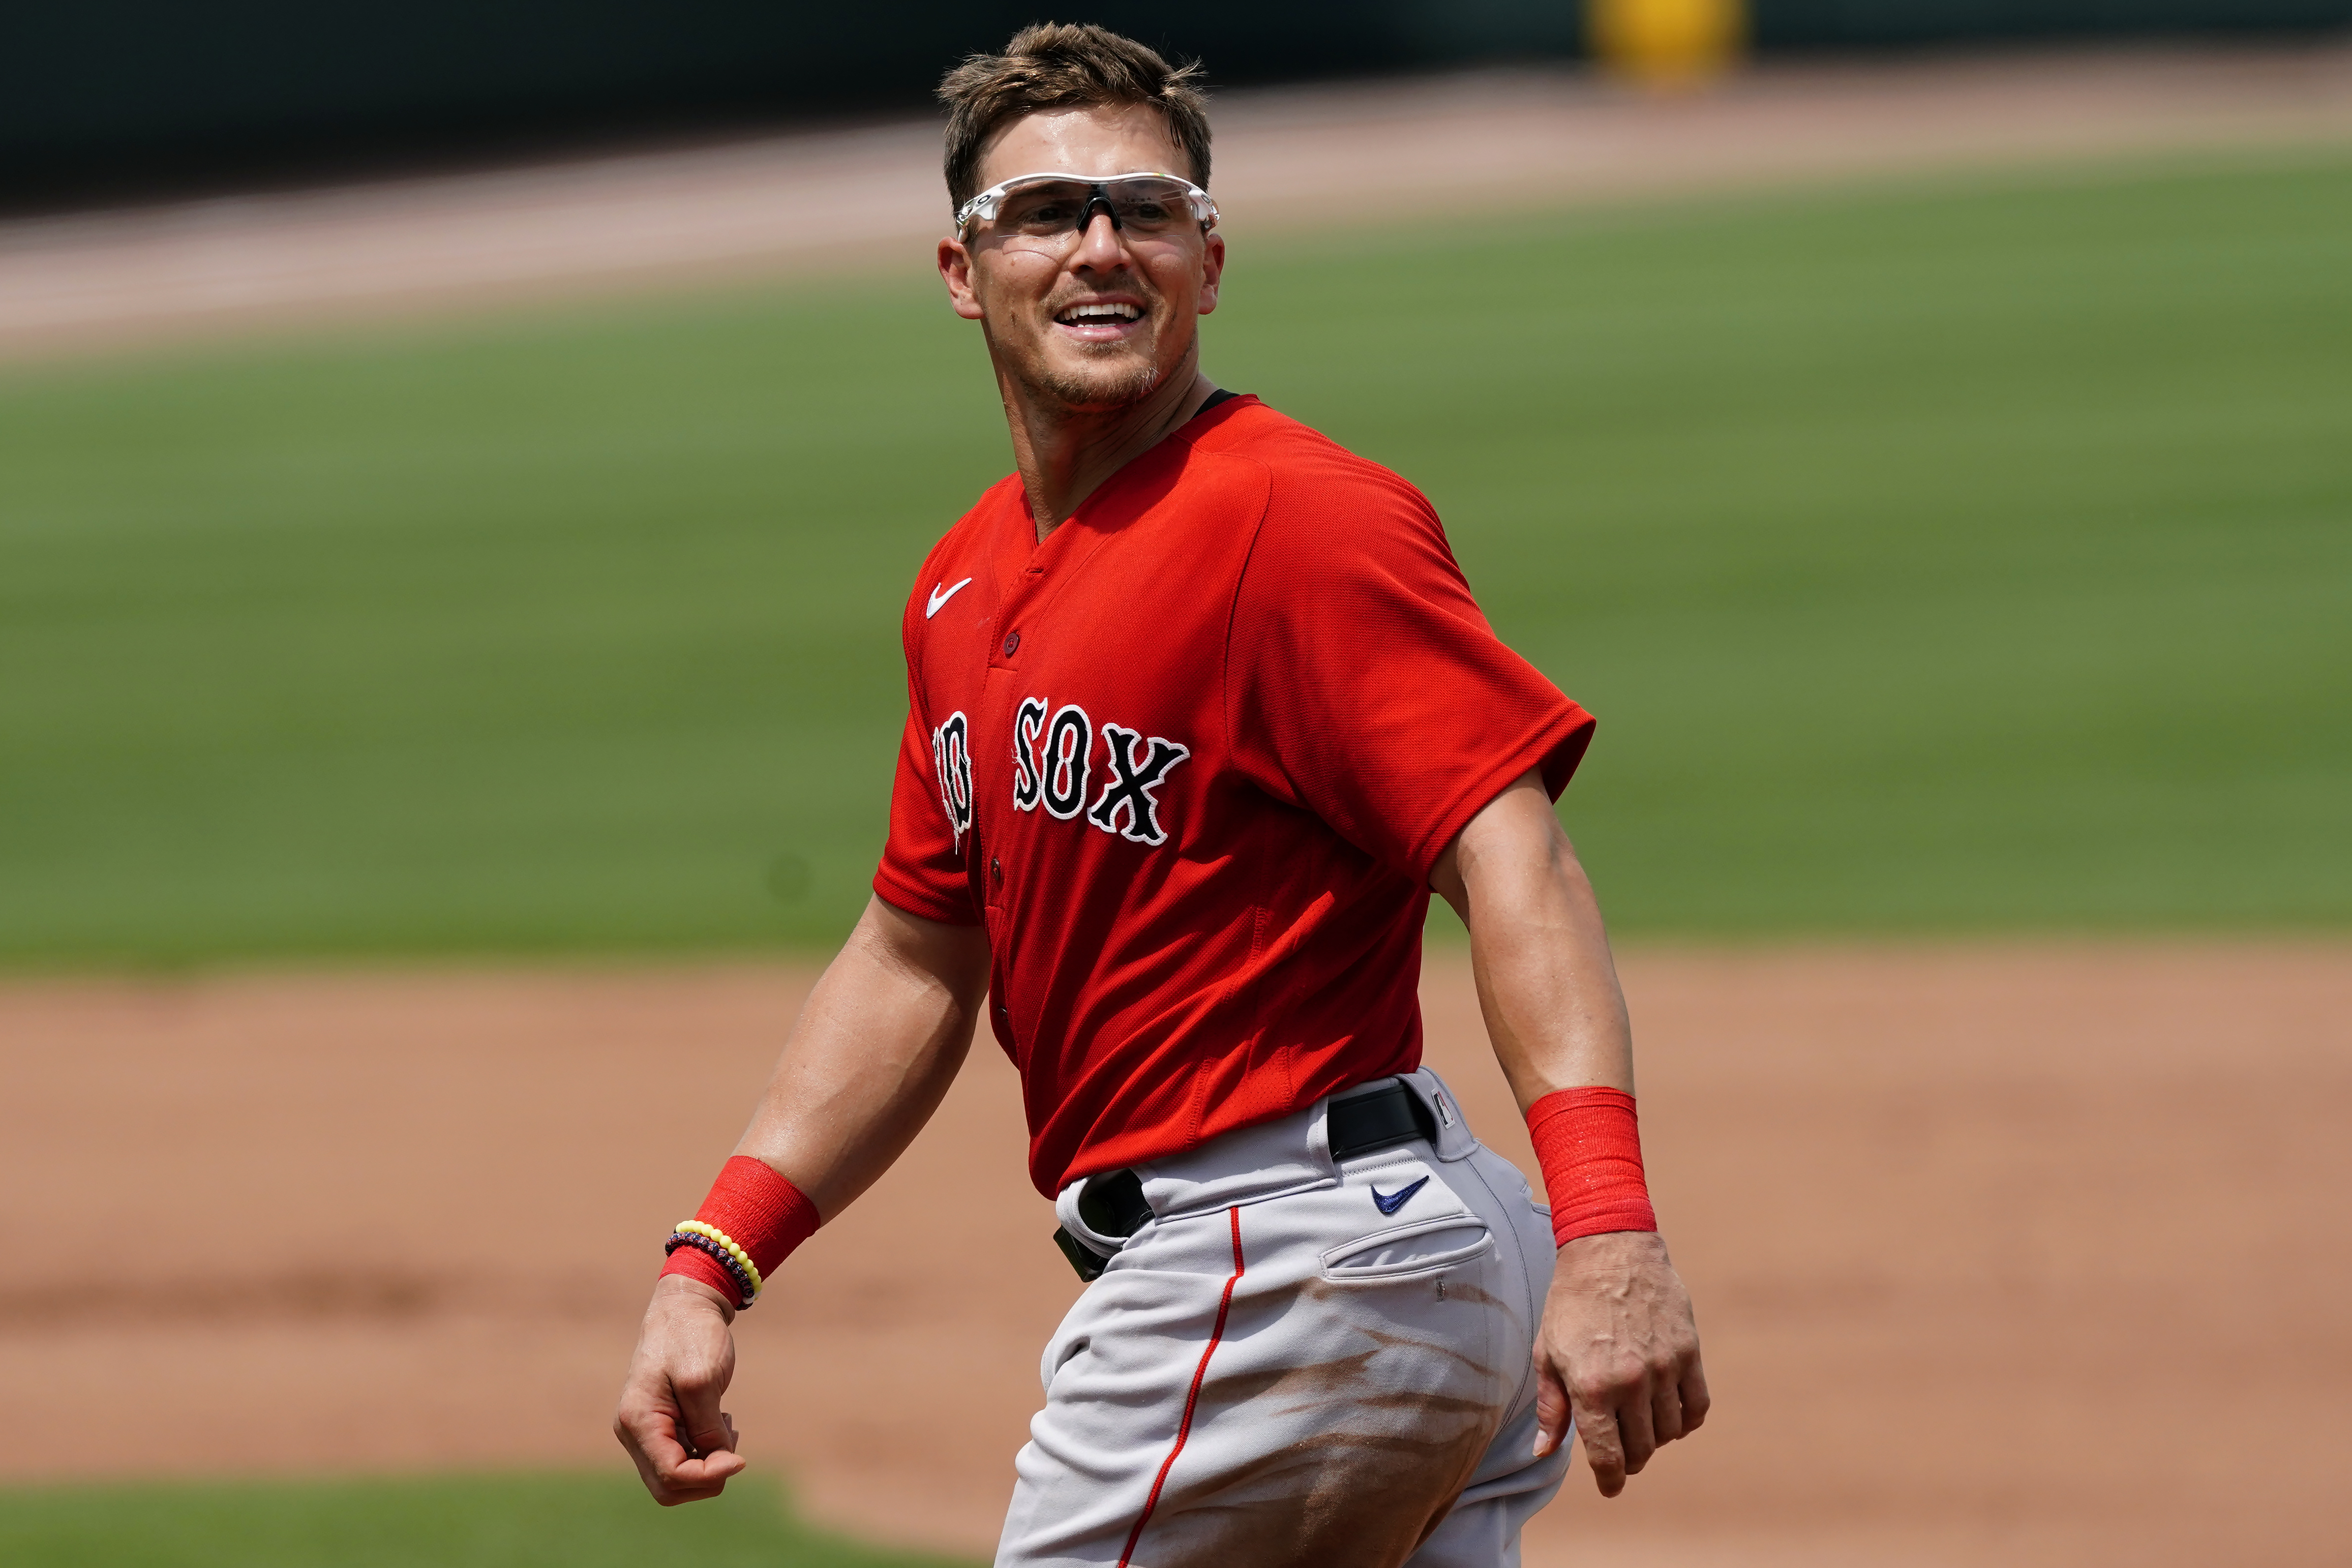 Red Sox Opening Day: Kiké Hernández will be the player to watch today